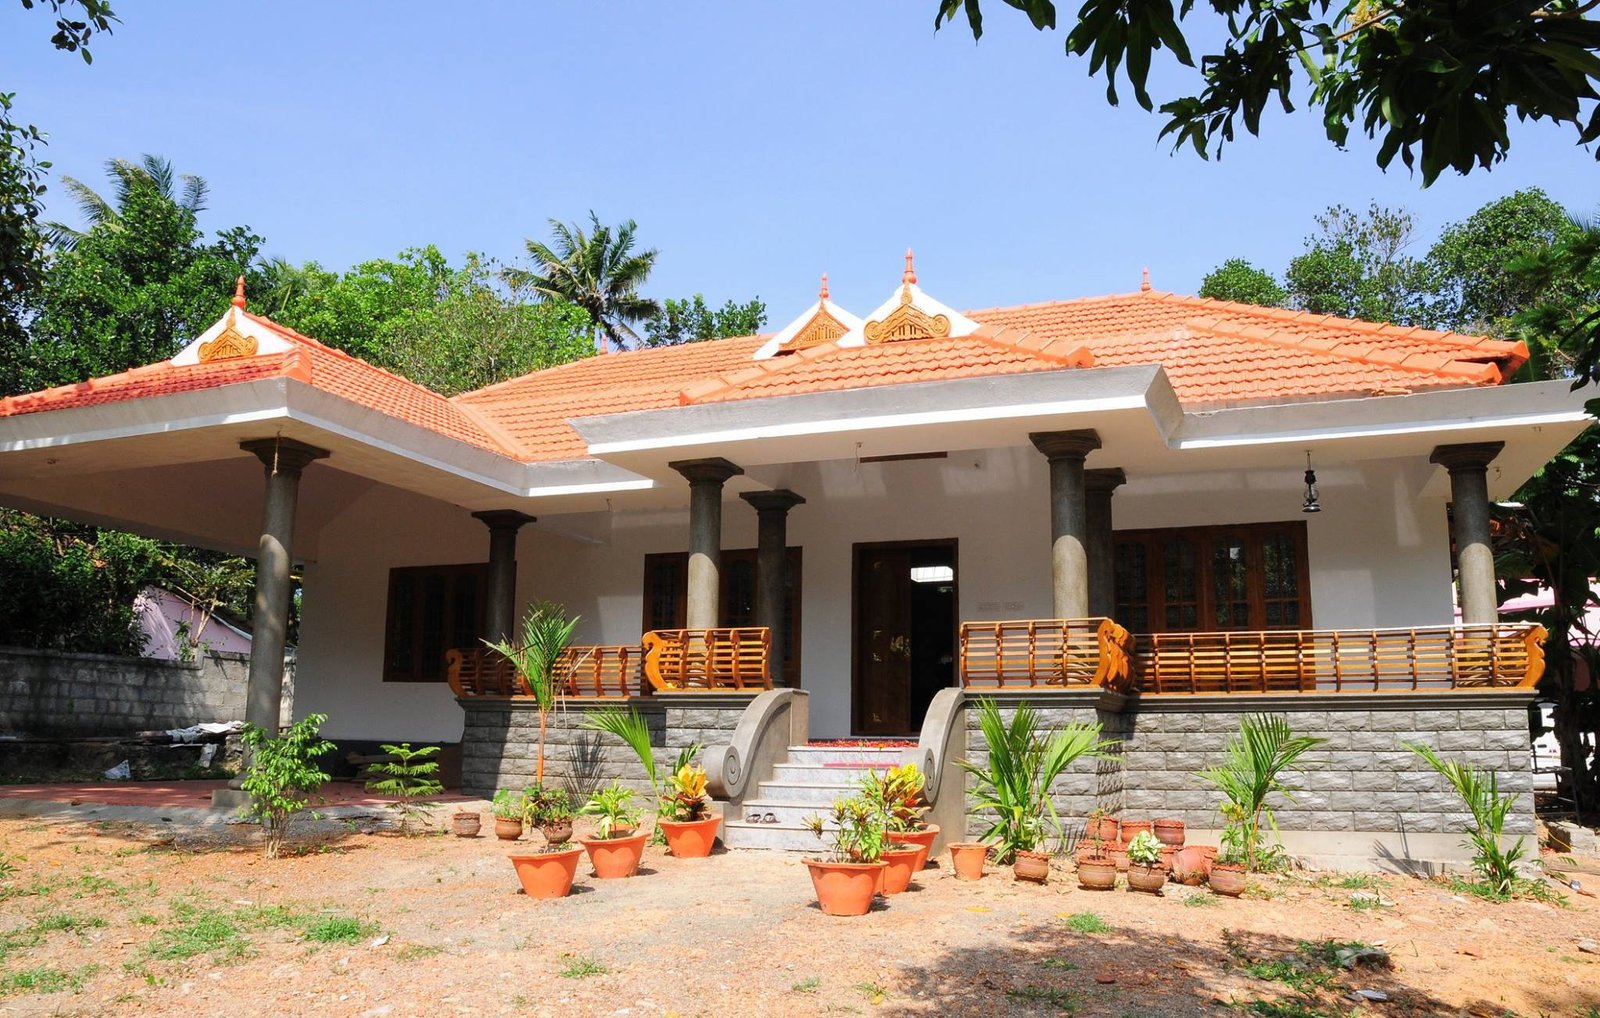 Kerala Traditional Home Design With Poomukham,Naalukettu - Home Pictures